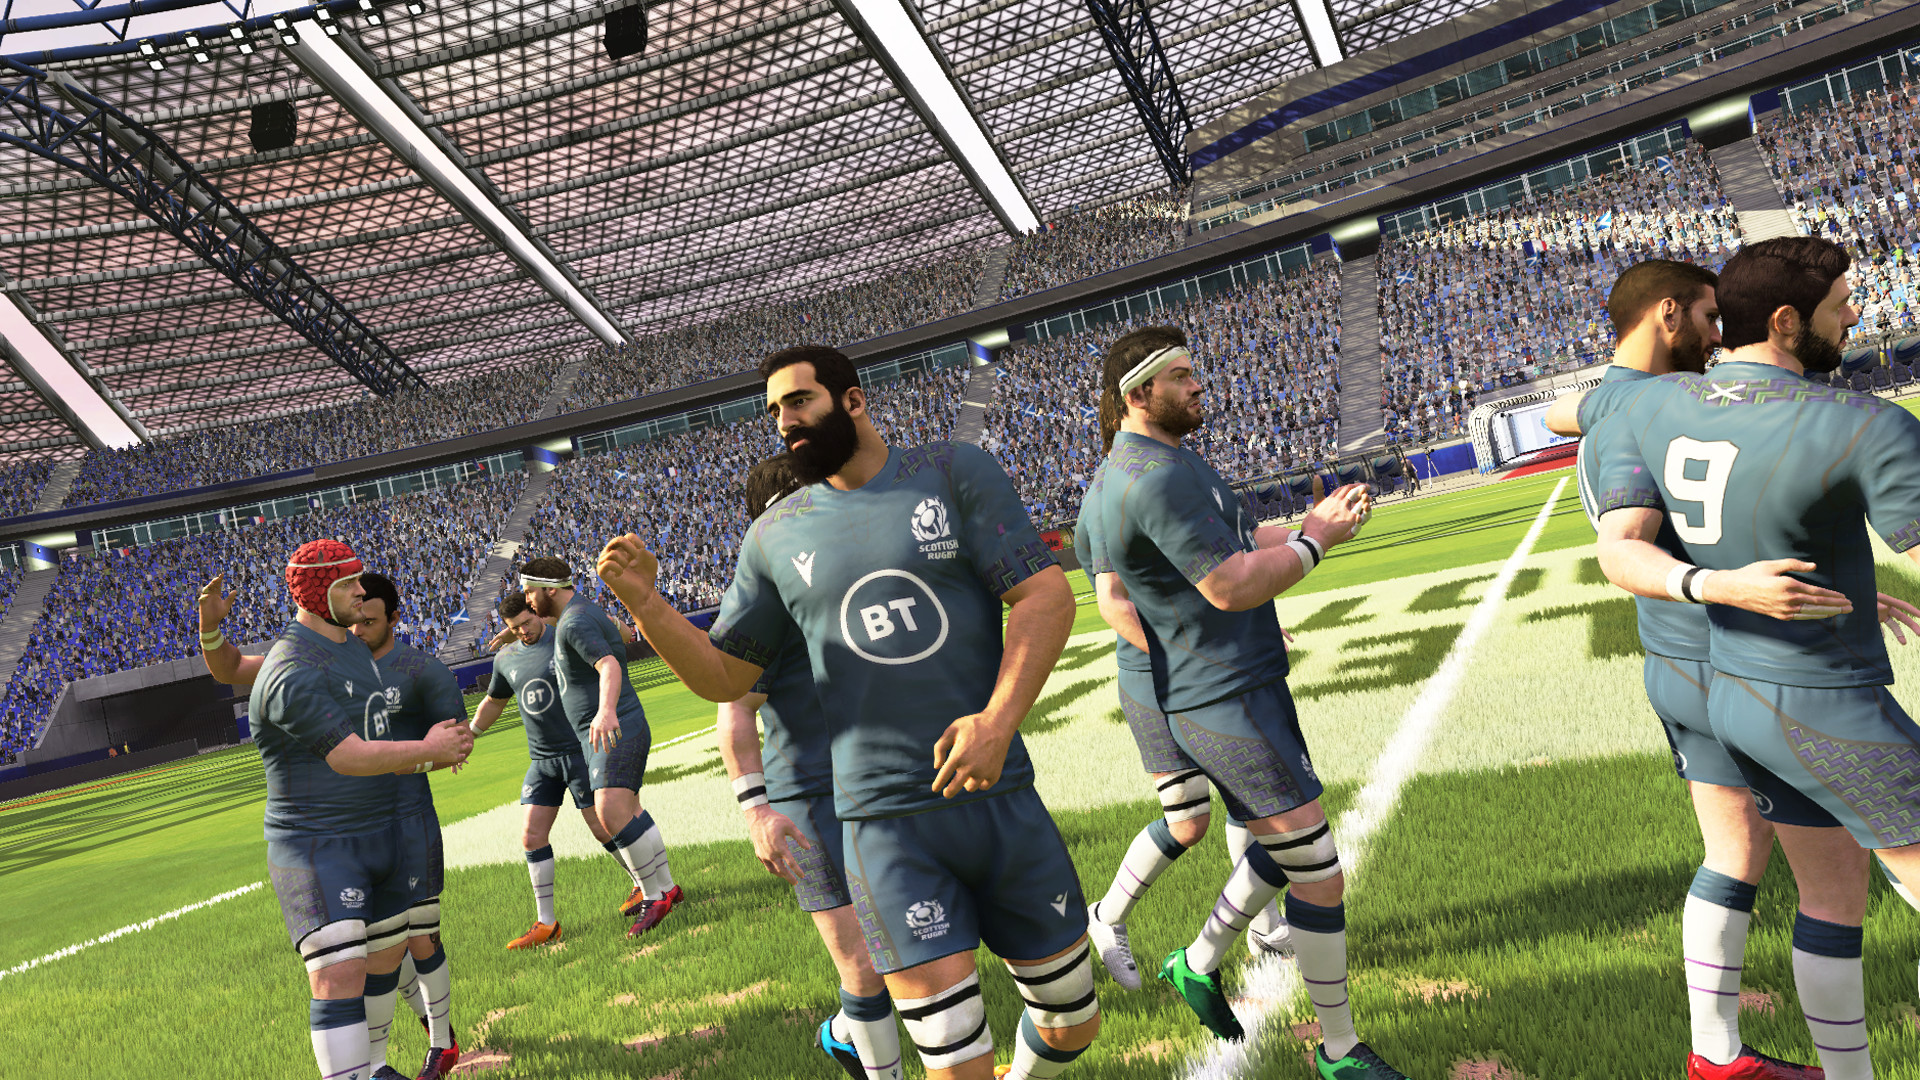 RUGBY 20 Free Download